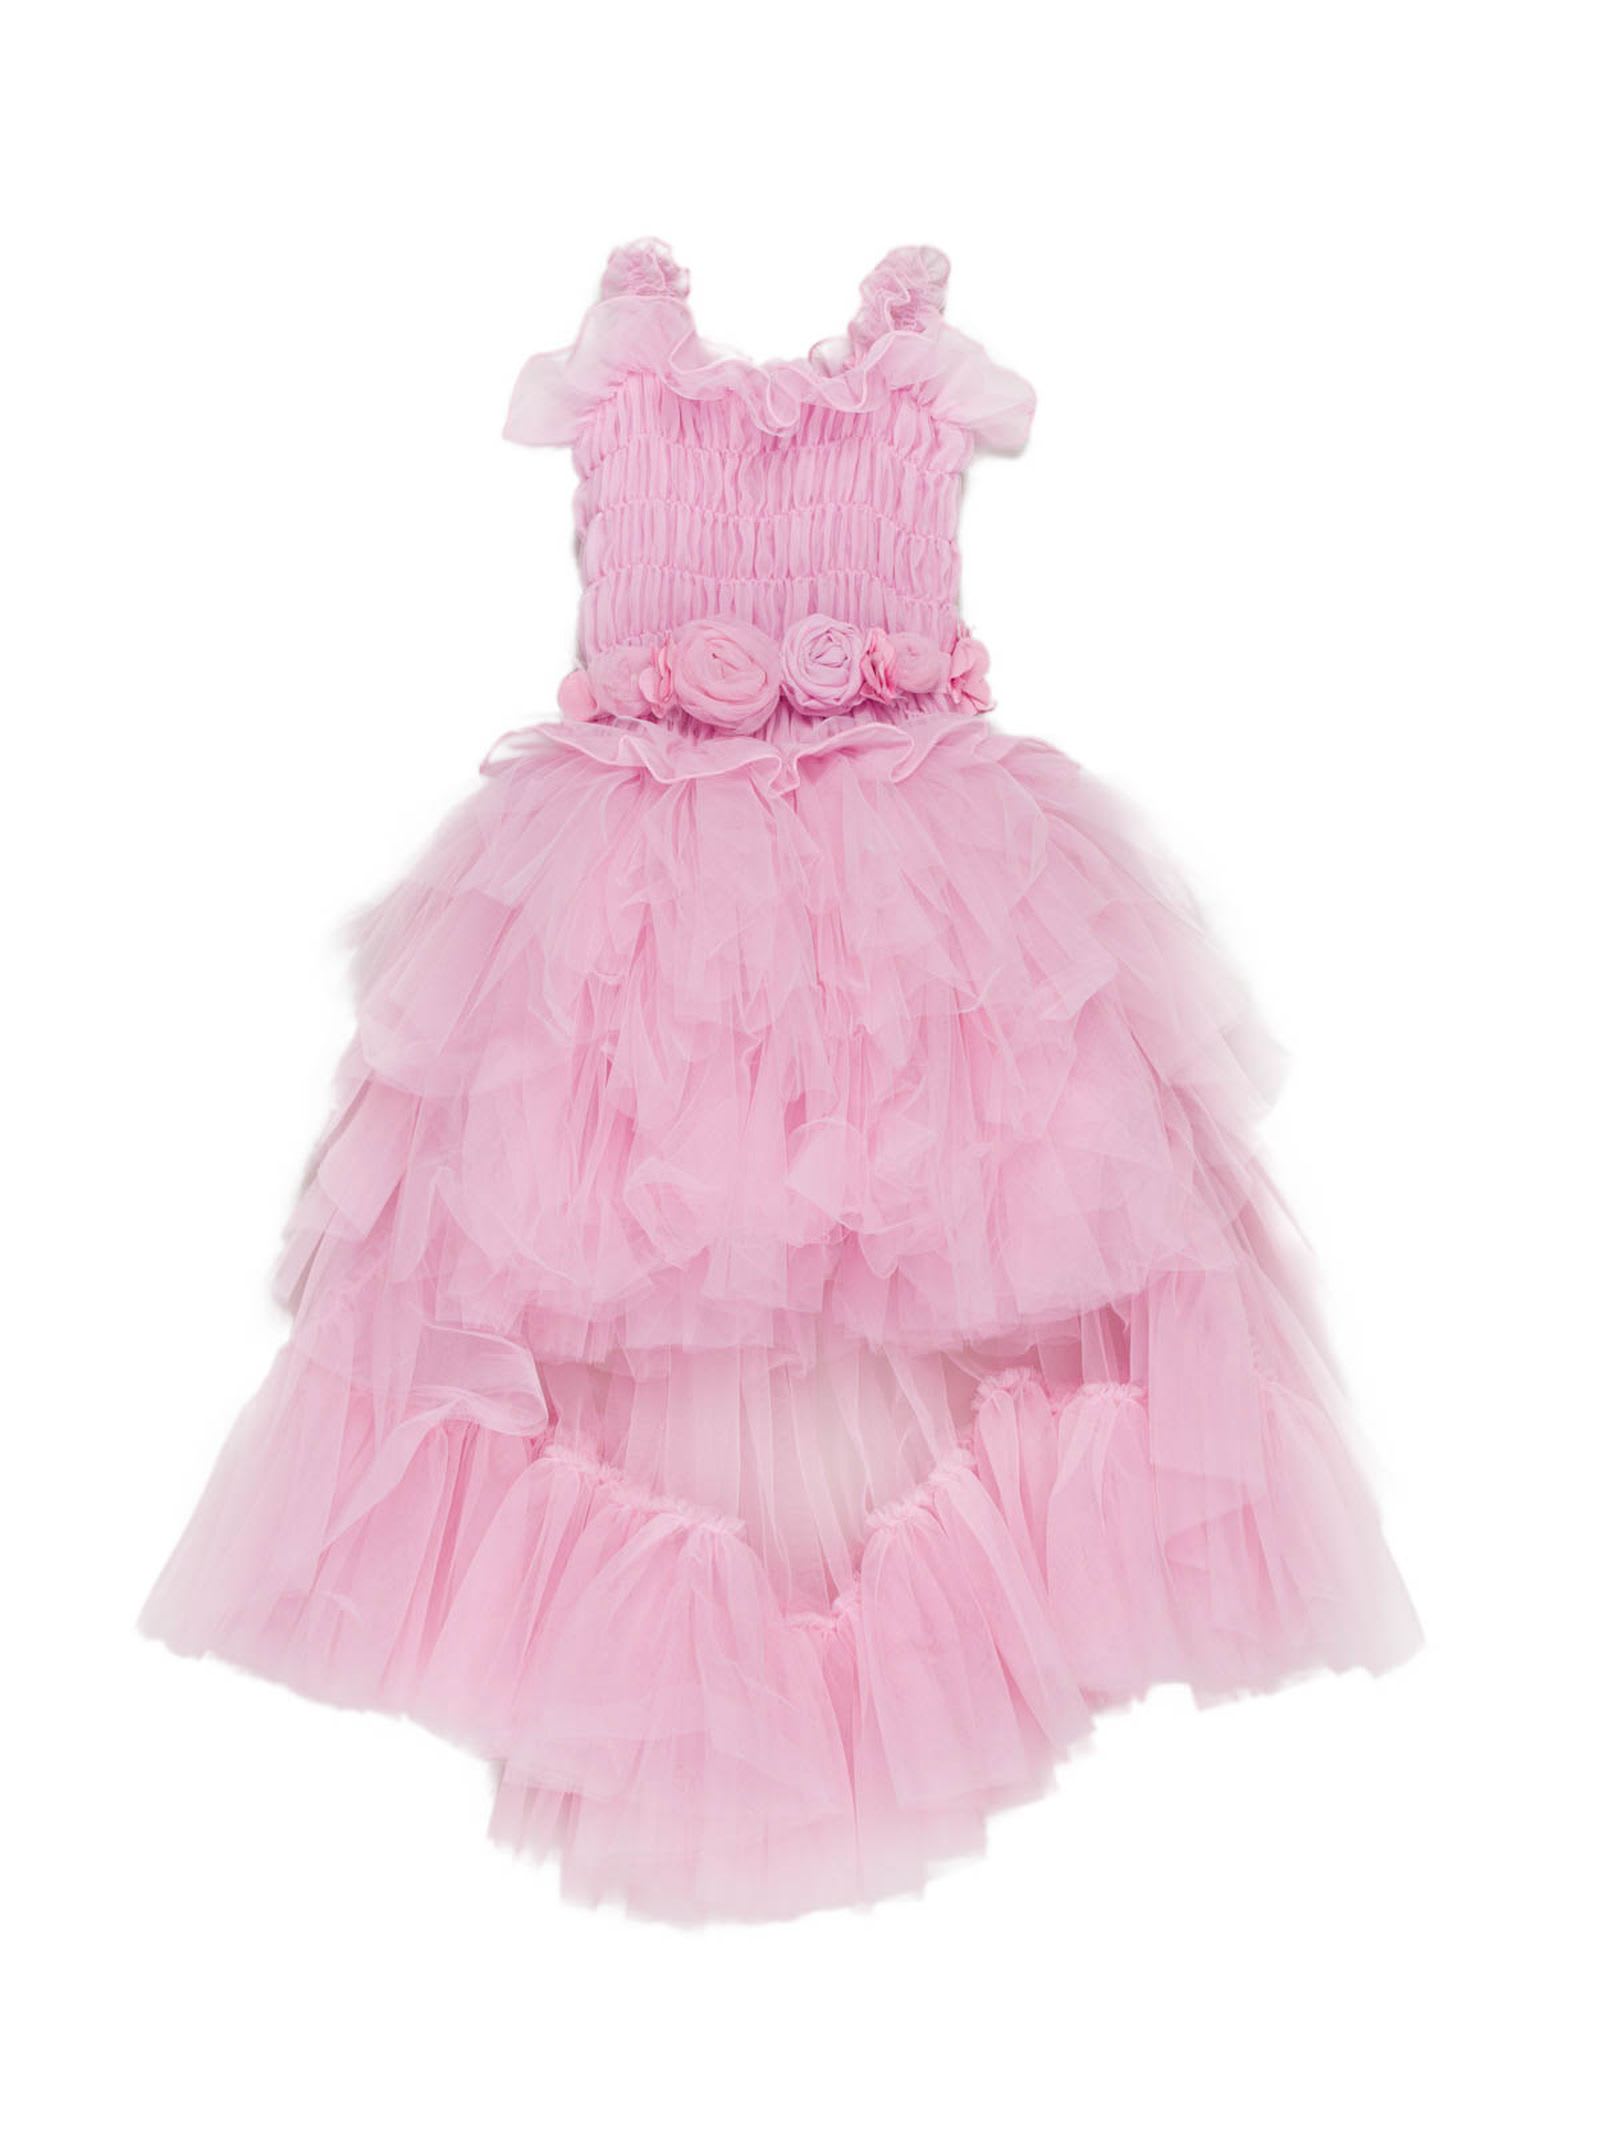 MISS GRANT LONG DRESS IN PINK TULLE